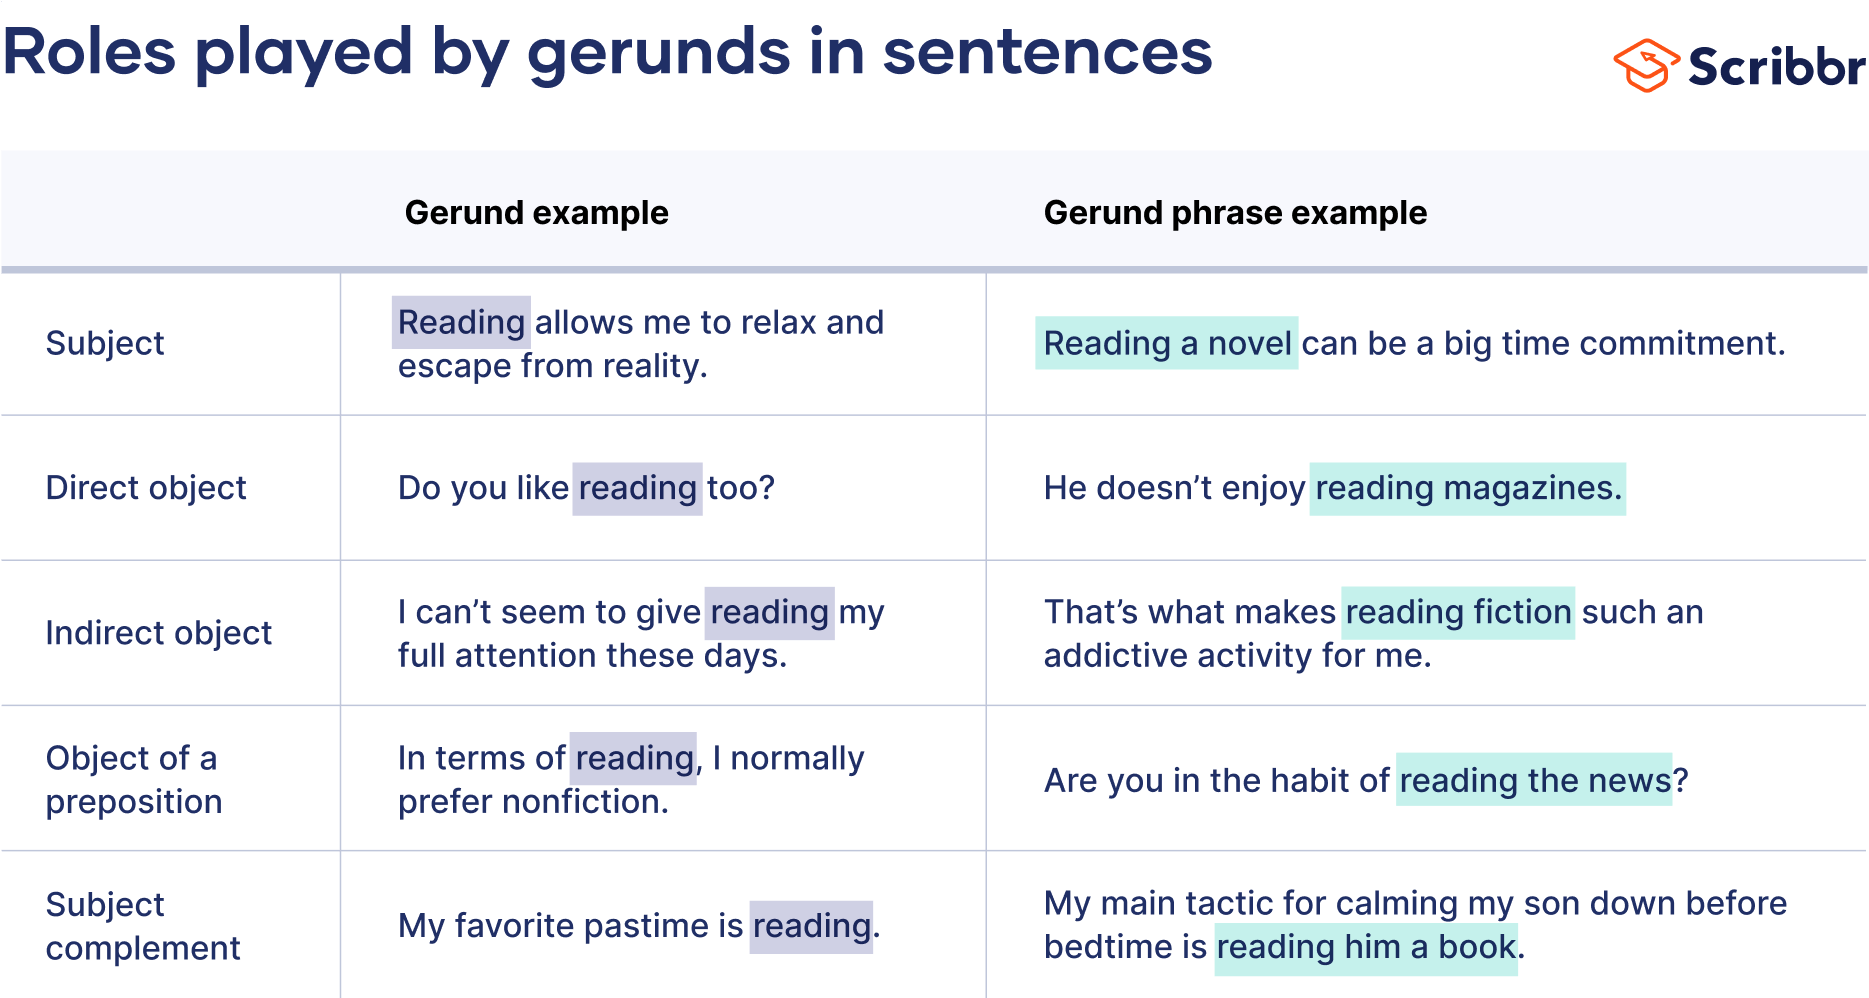 Roles played by gerunds in sentences